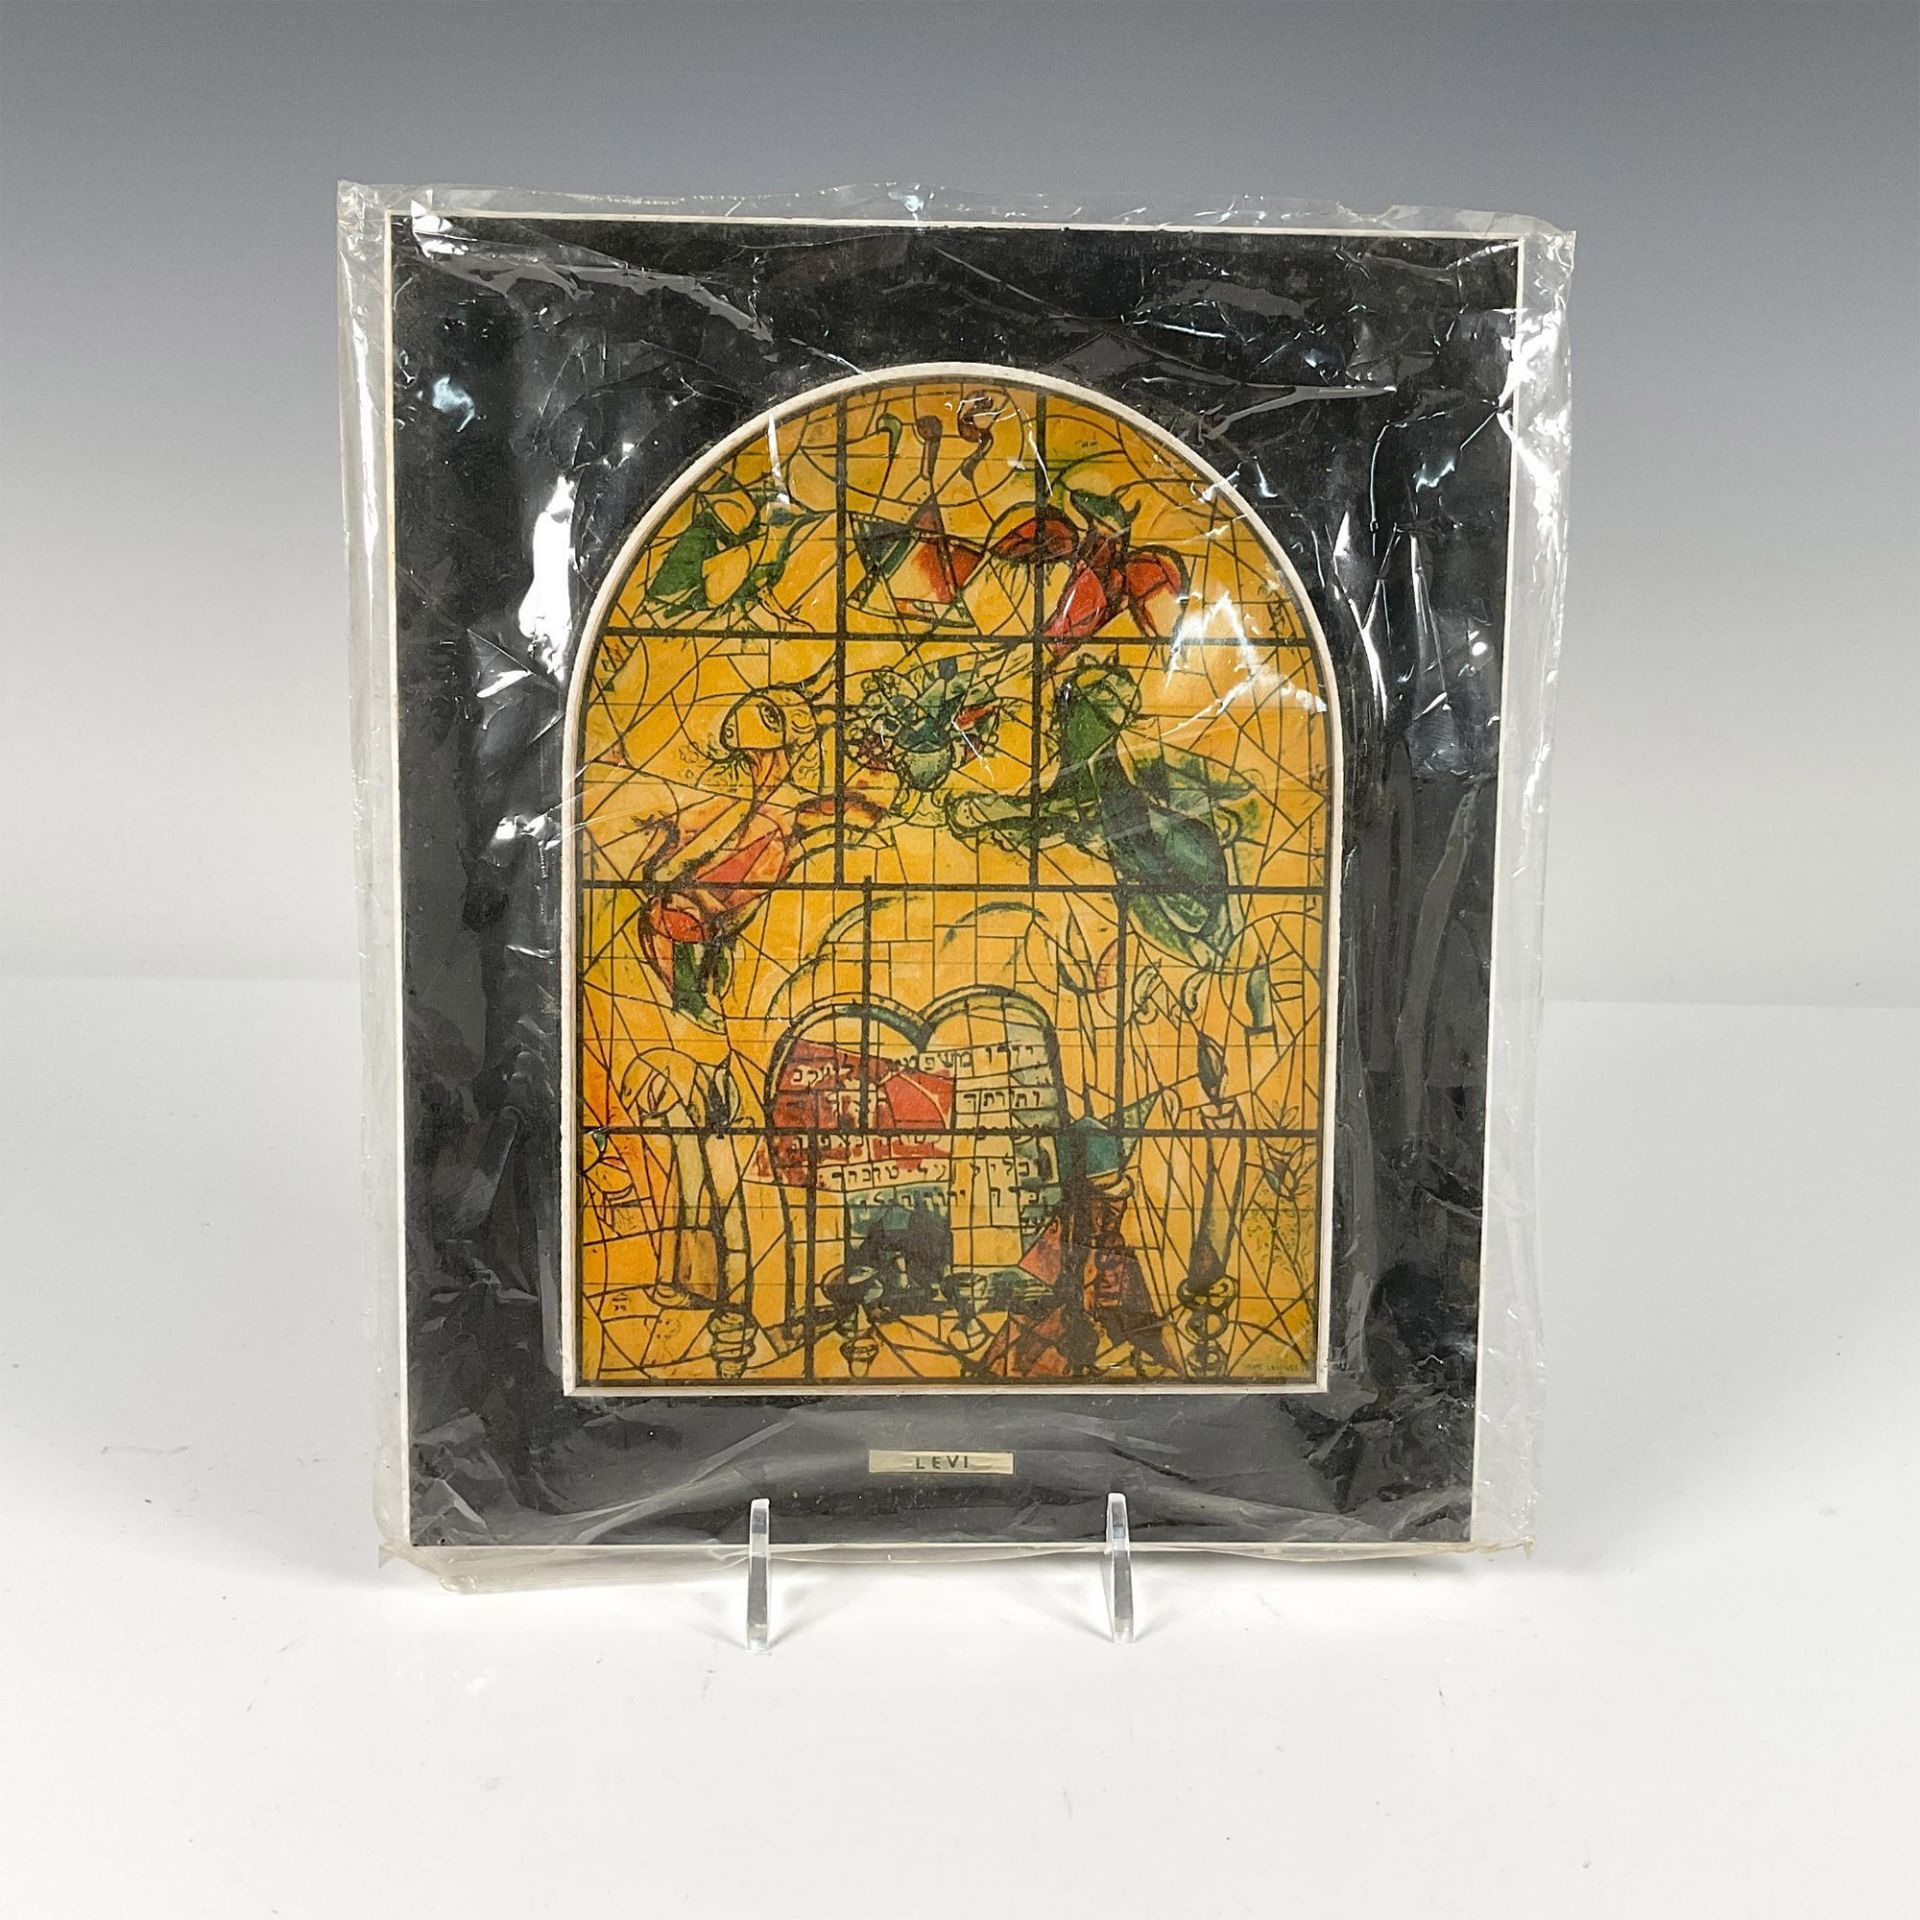 13pc After Marc Chagall by Avissar Wooden Plaques, The 12 Stained Glass Windows - Image 9 of 20